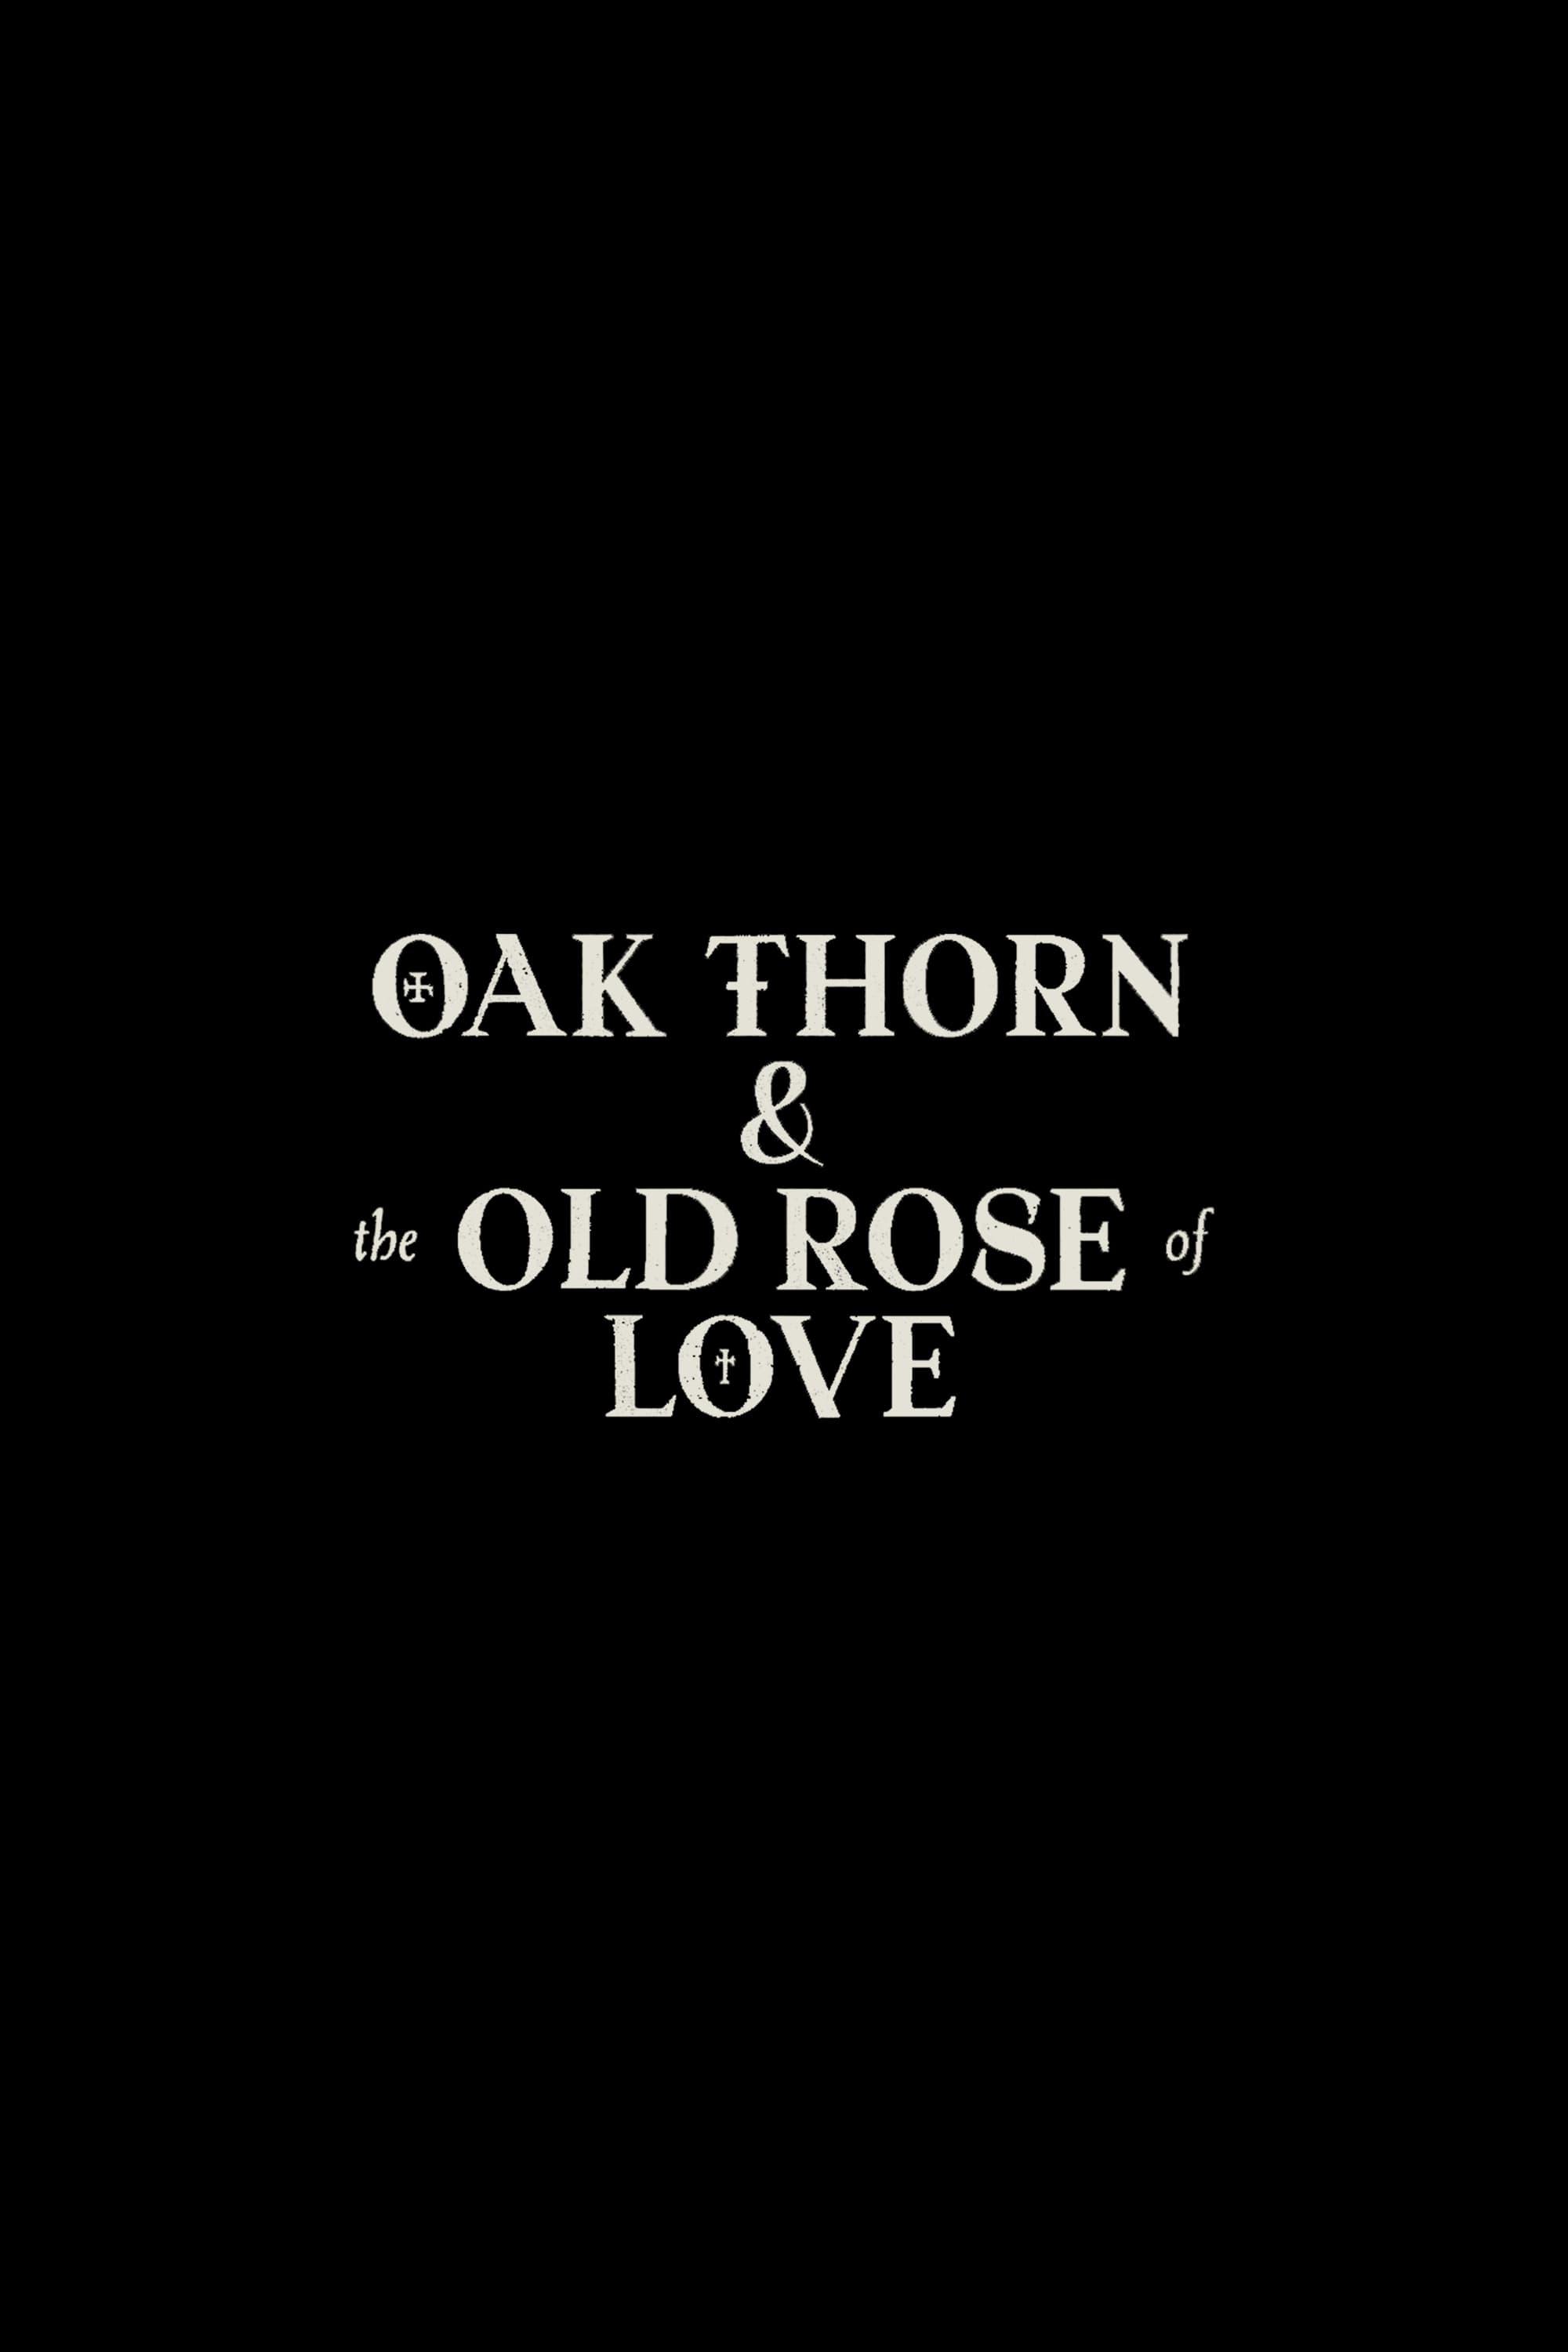 Oak Thorn & the Old Rose of Love poster